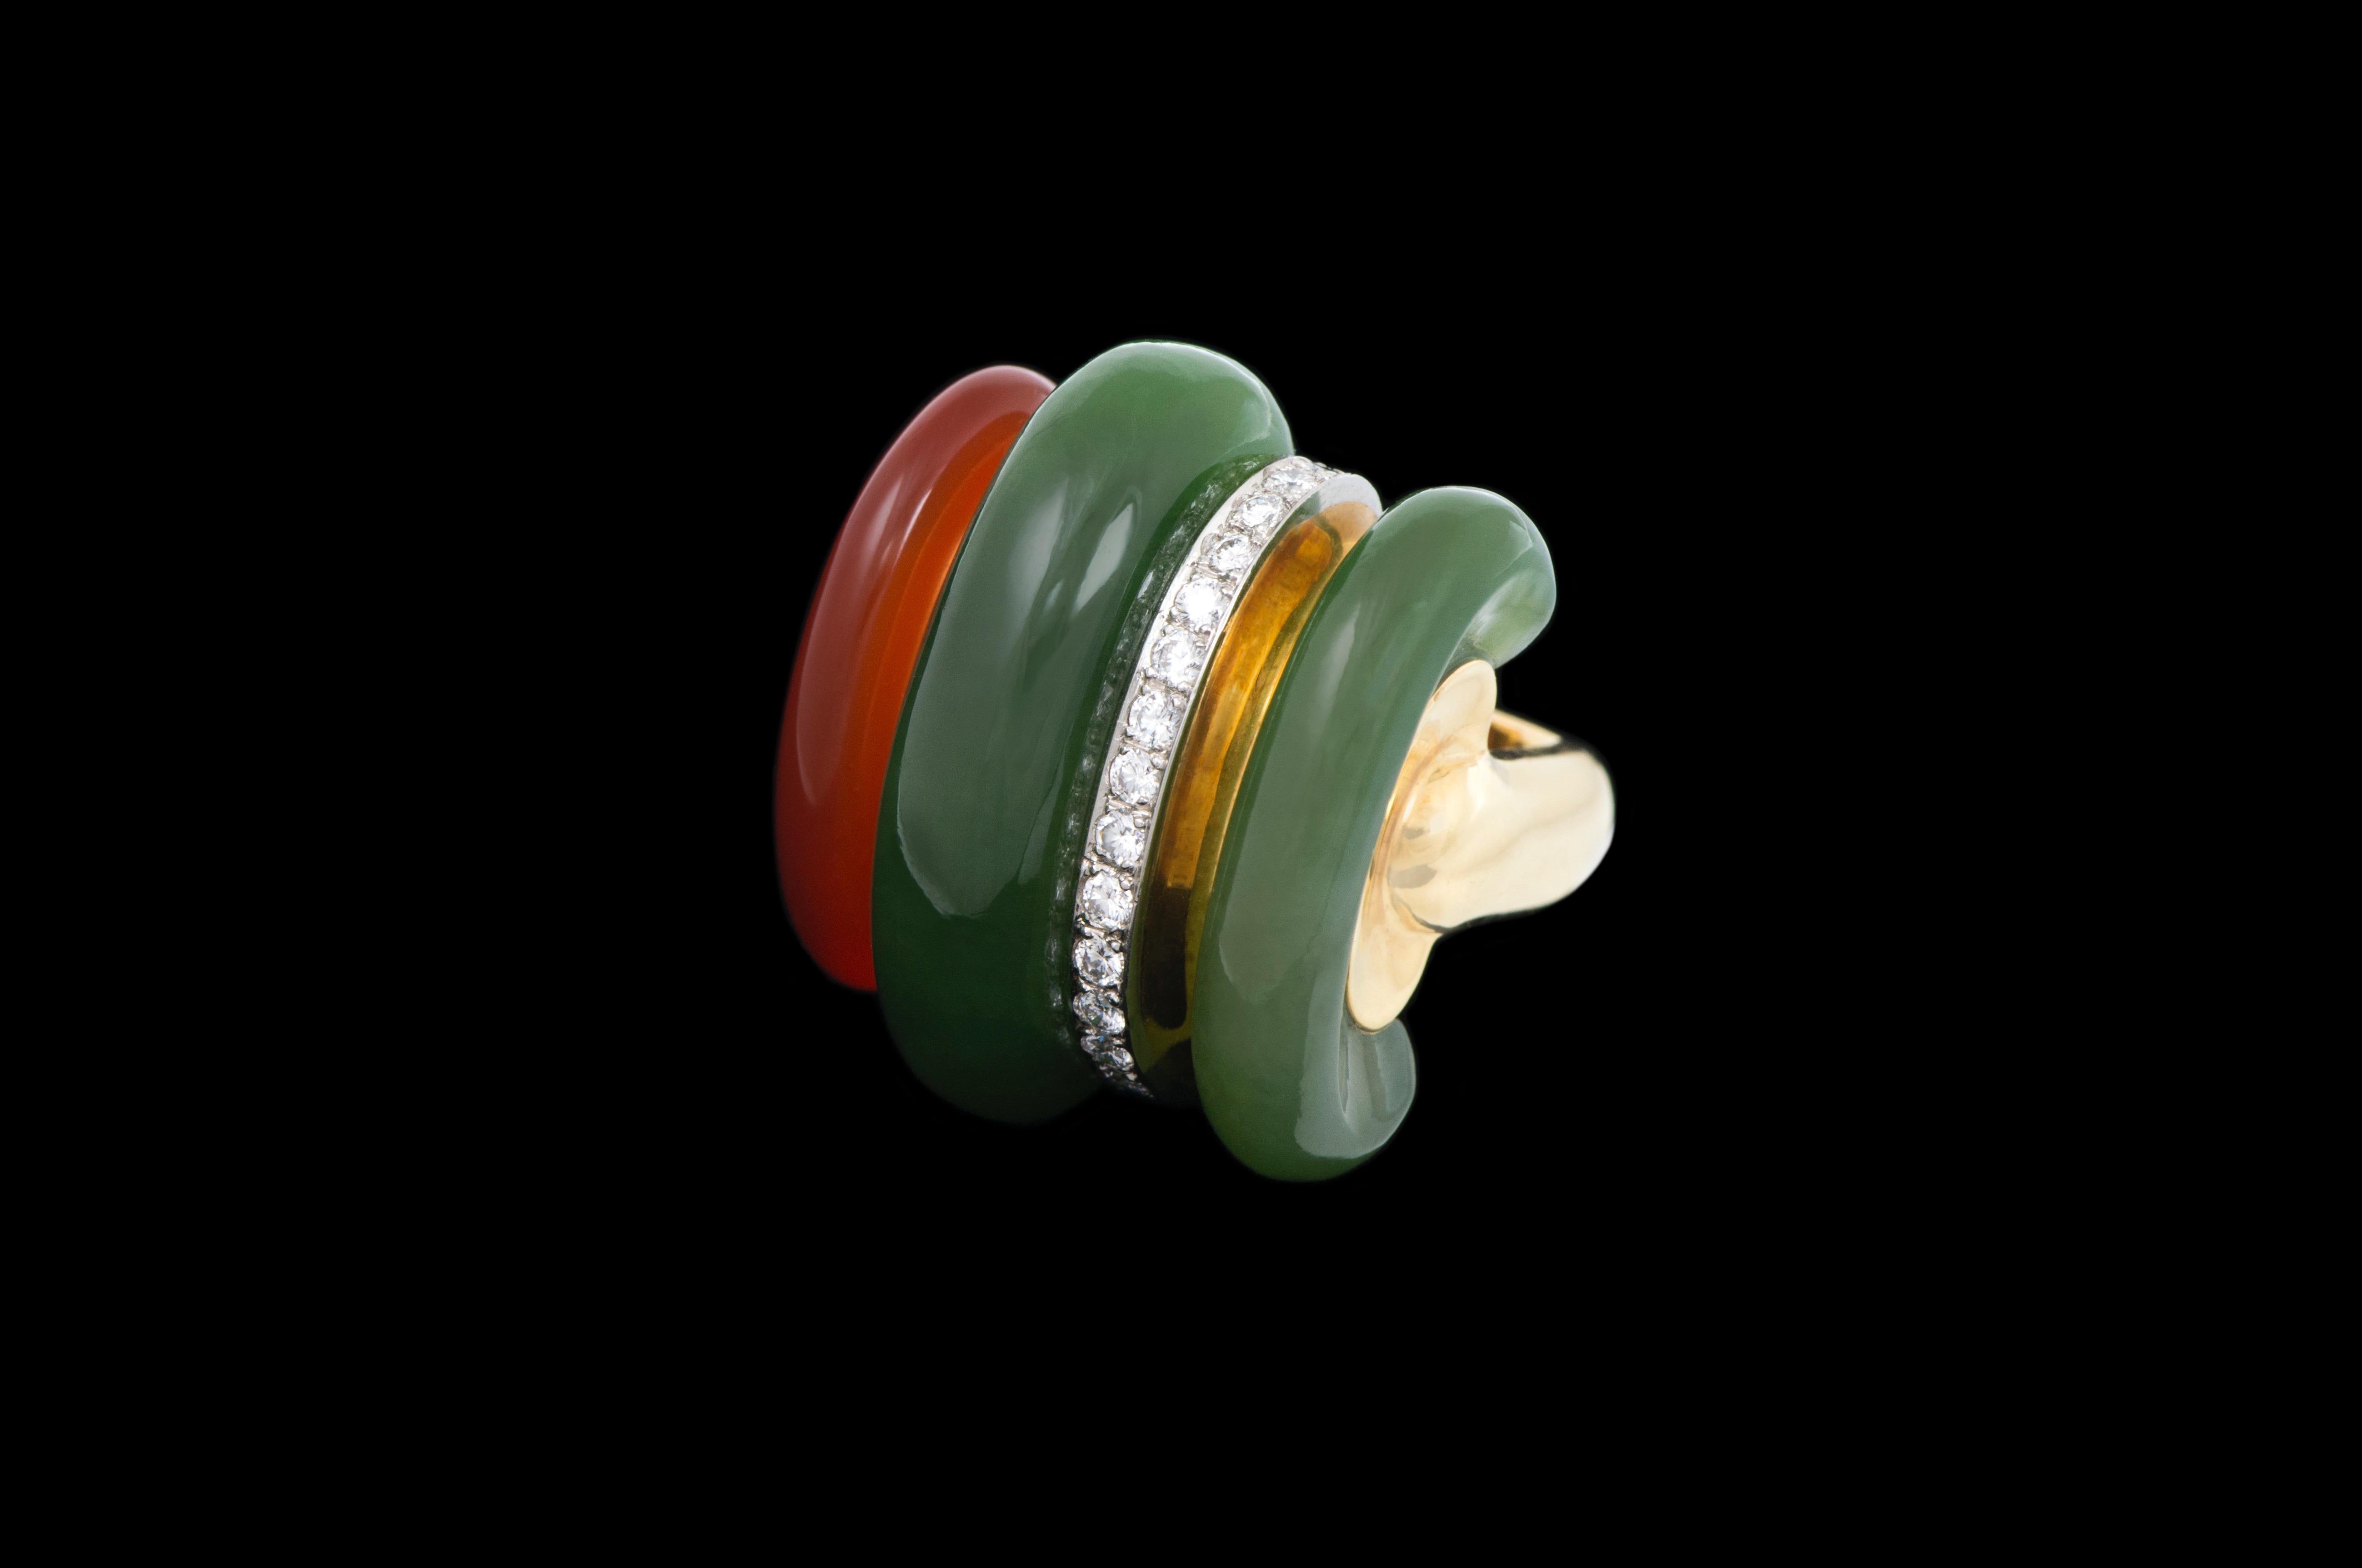 A carnelian, nephrite, diamond stripe, and 18 karat gold ring, by the Swiss firm of Gubelin, c. 1970. This unique and striking ring is a size 5 3/4. 